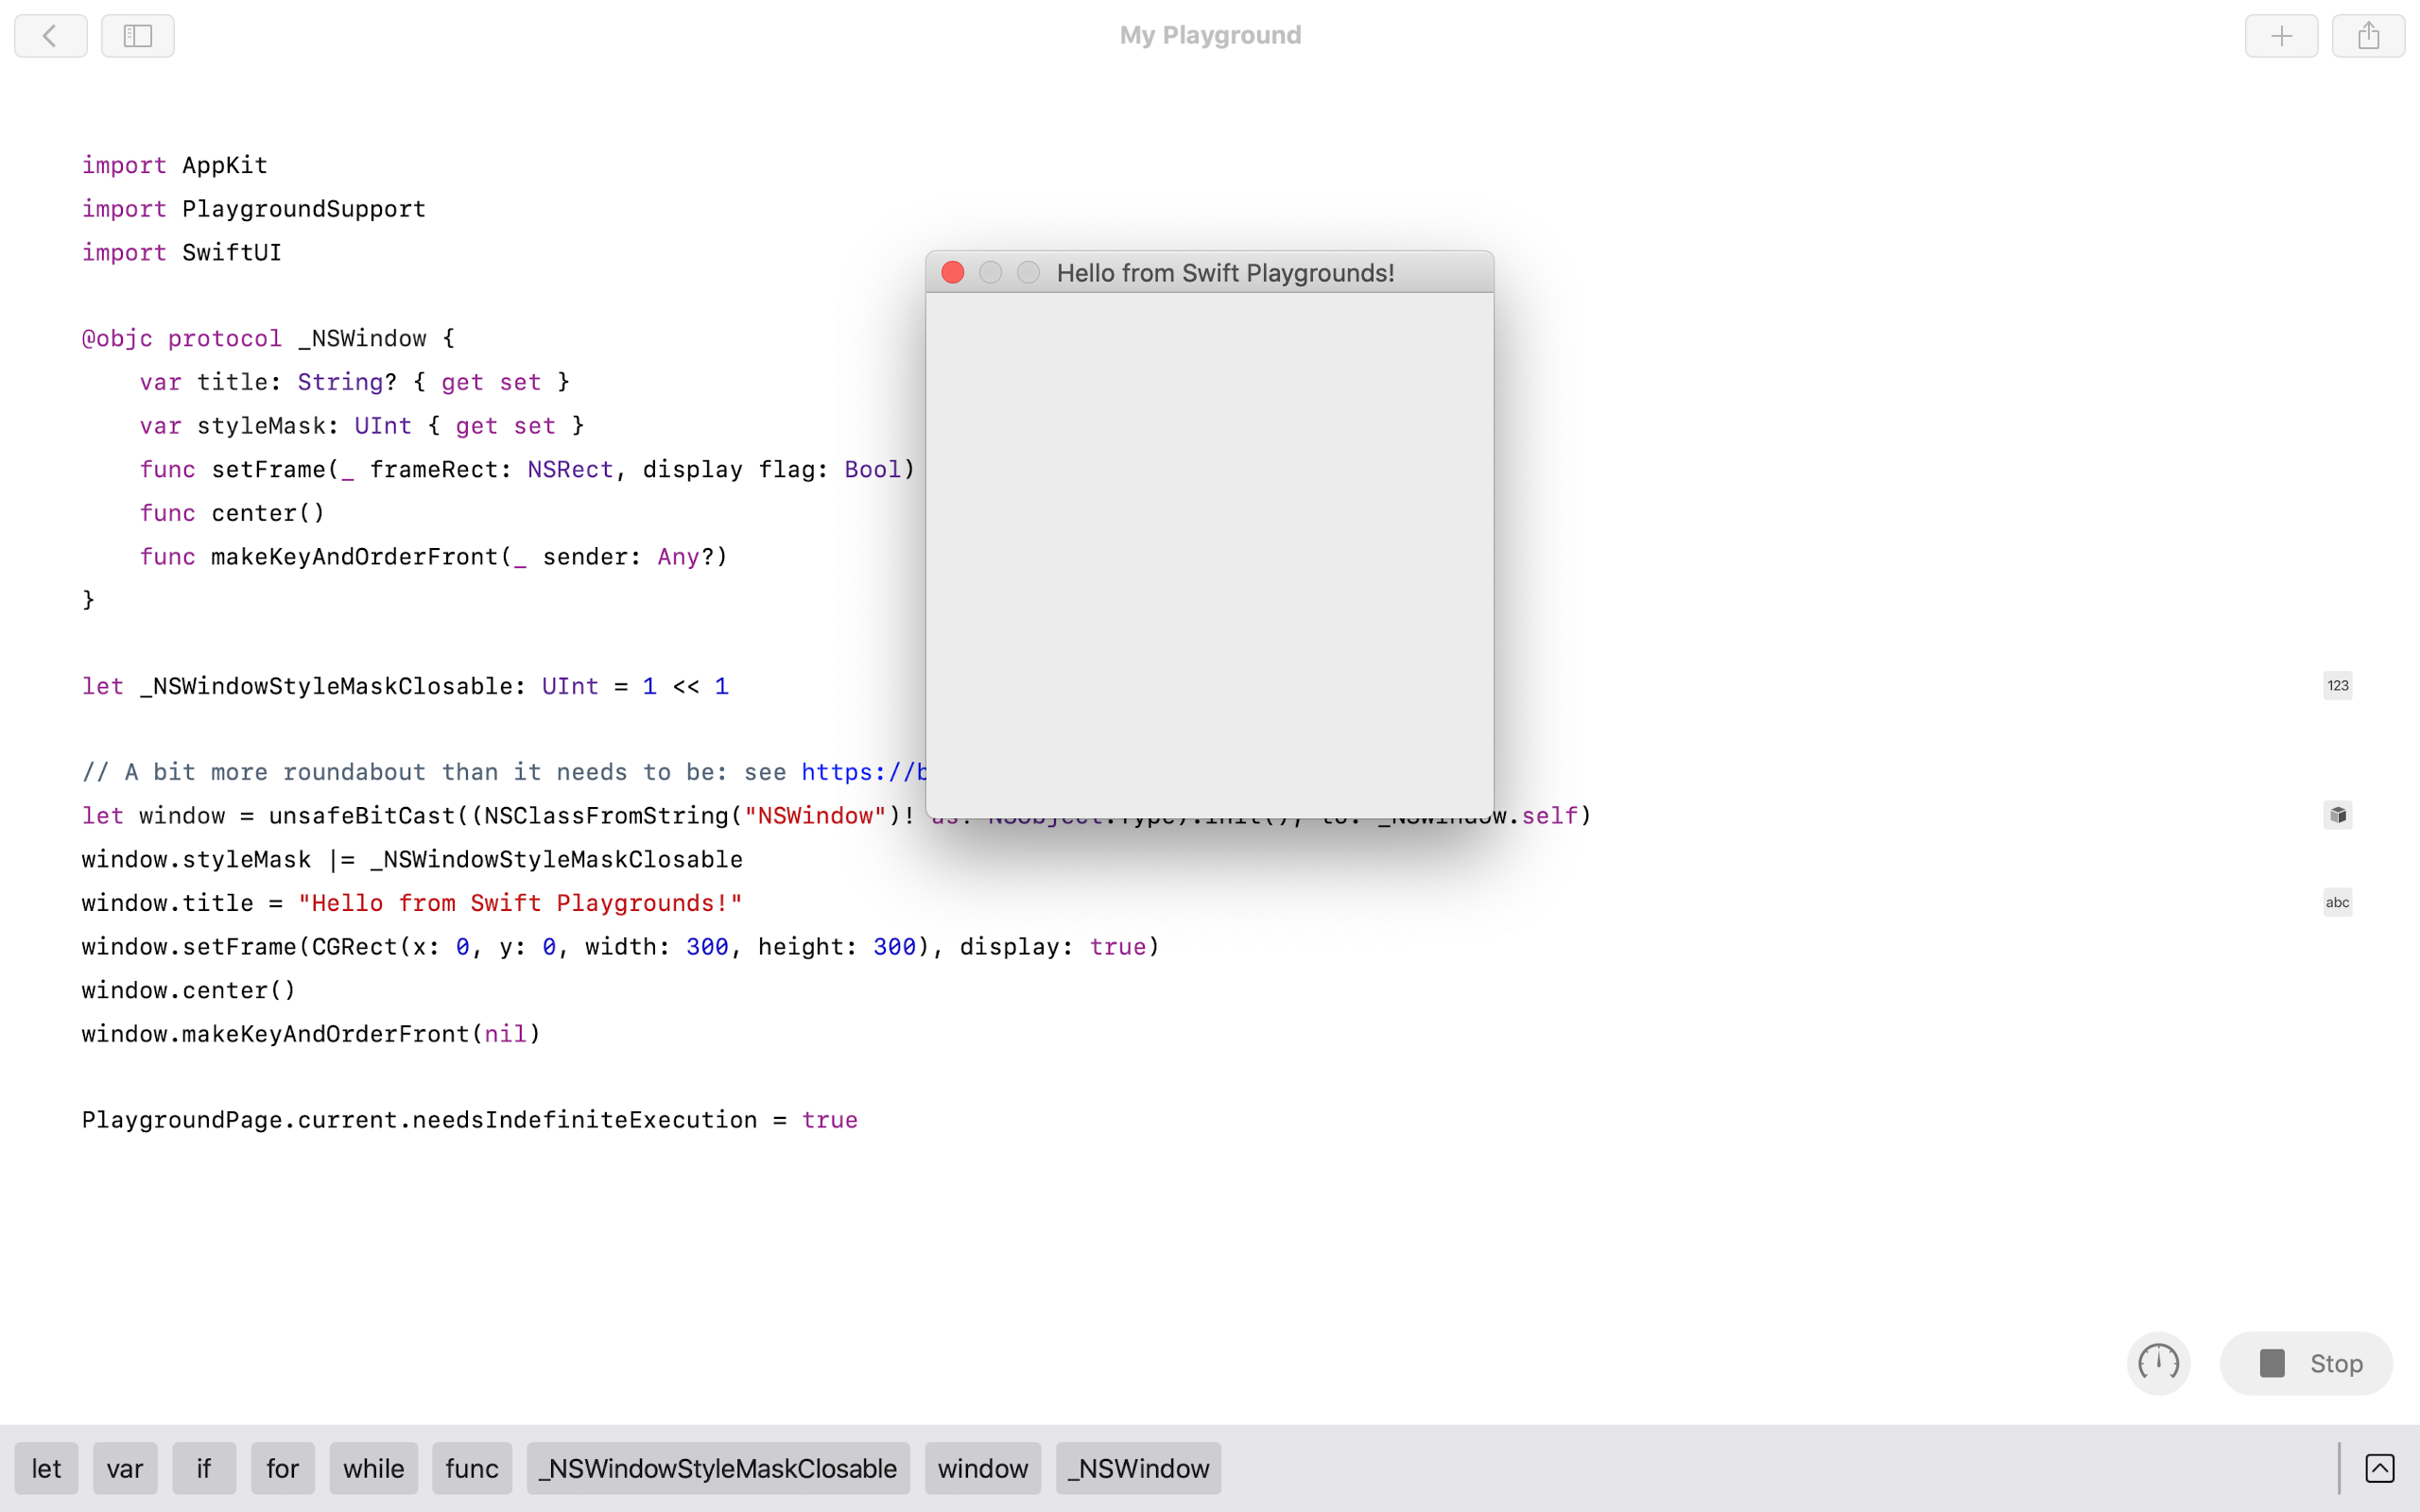 A native AppKit window presented from Swift Playgrounds on macOS. It's titled "Hello from Swift Playgrounds!".